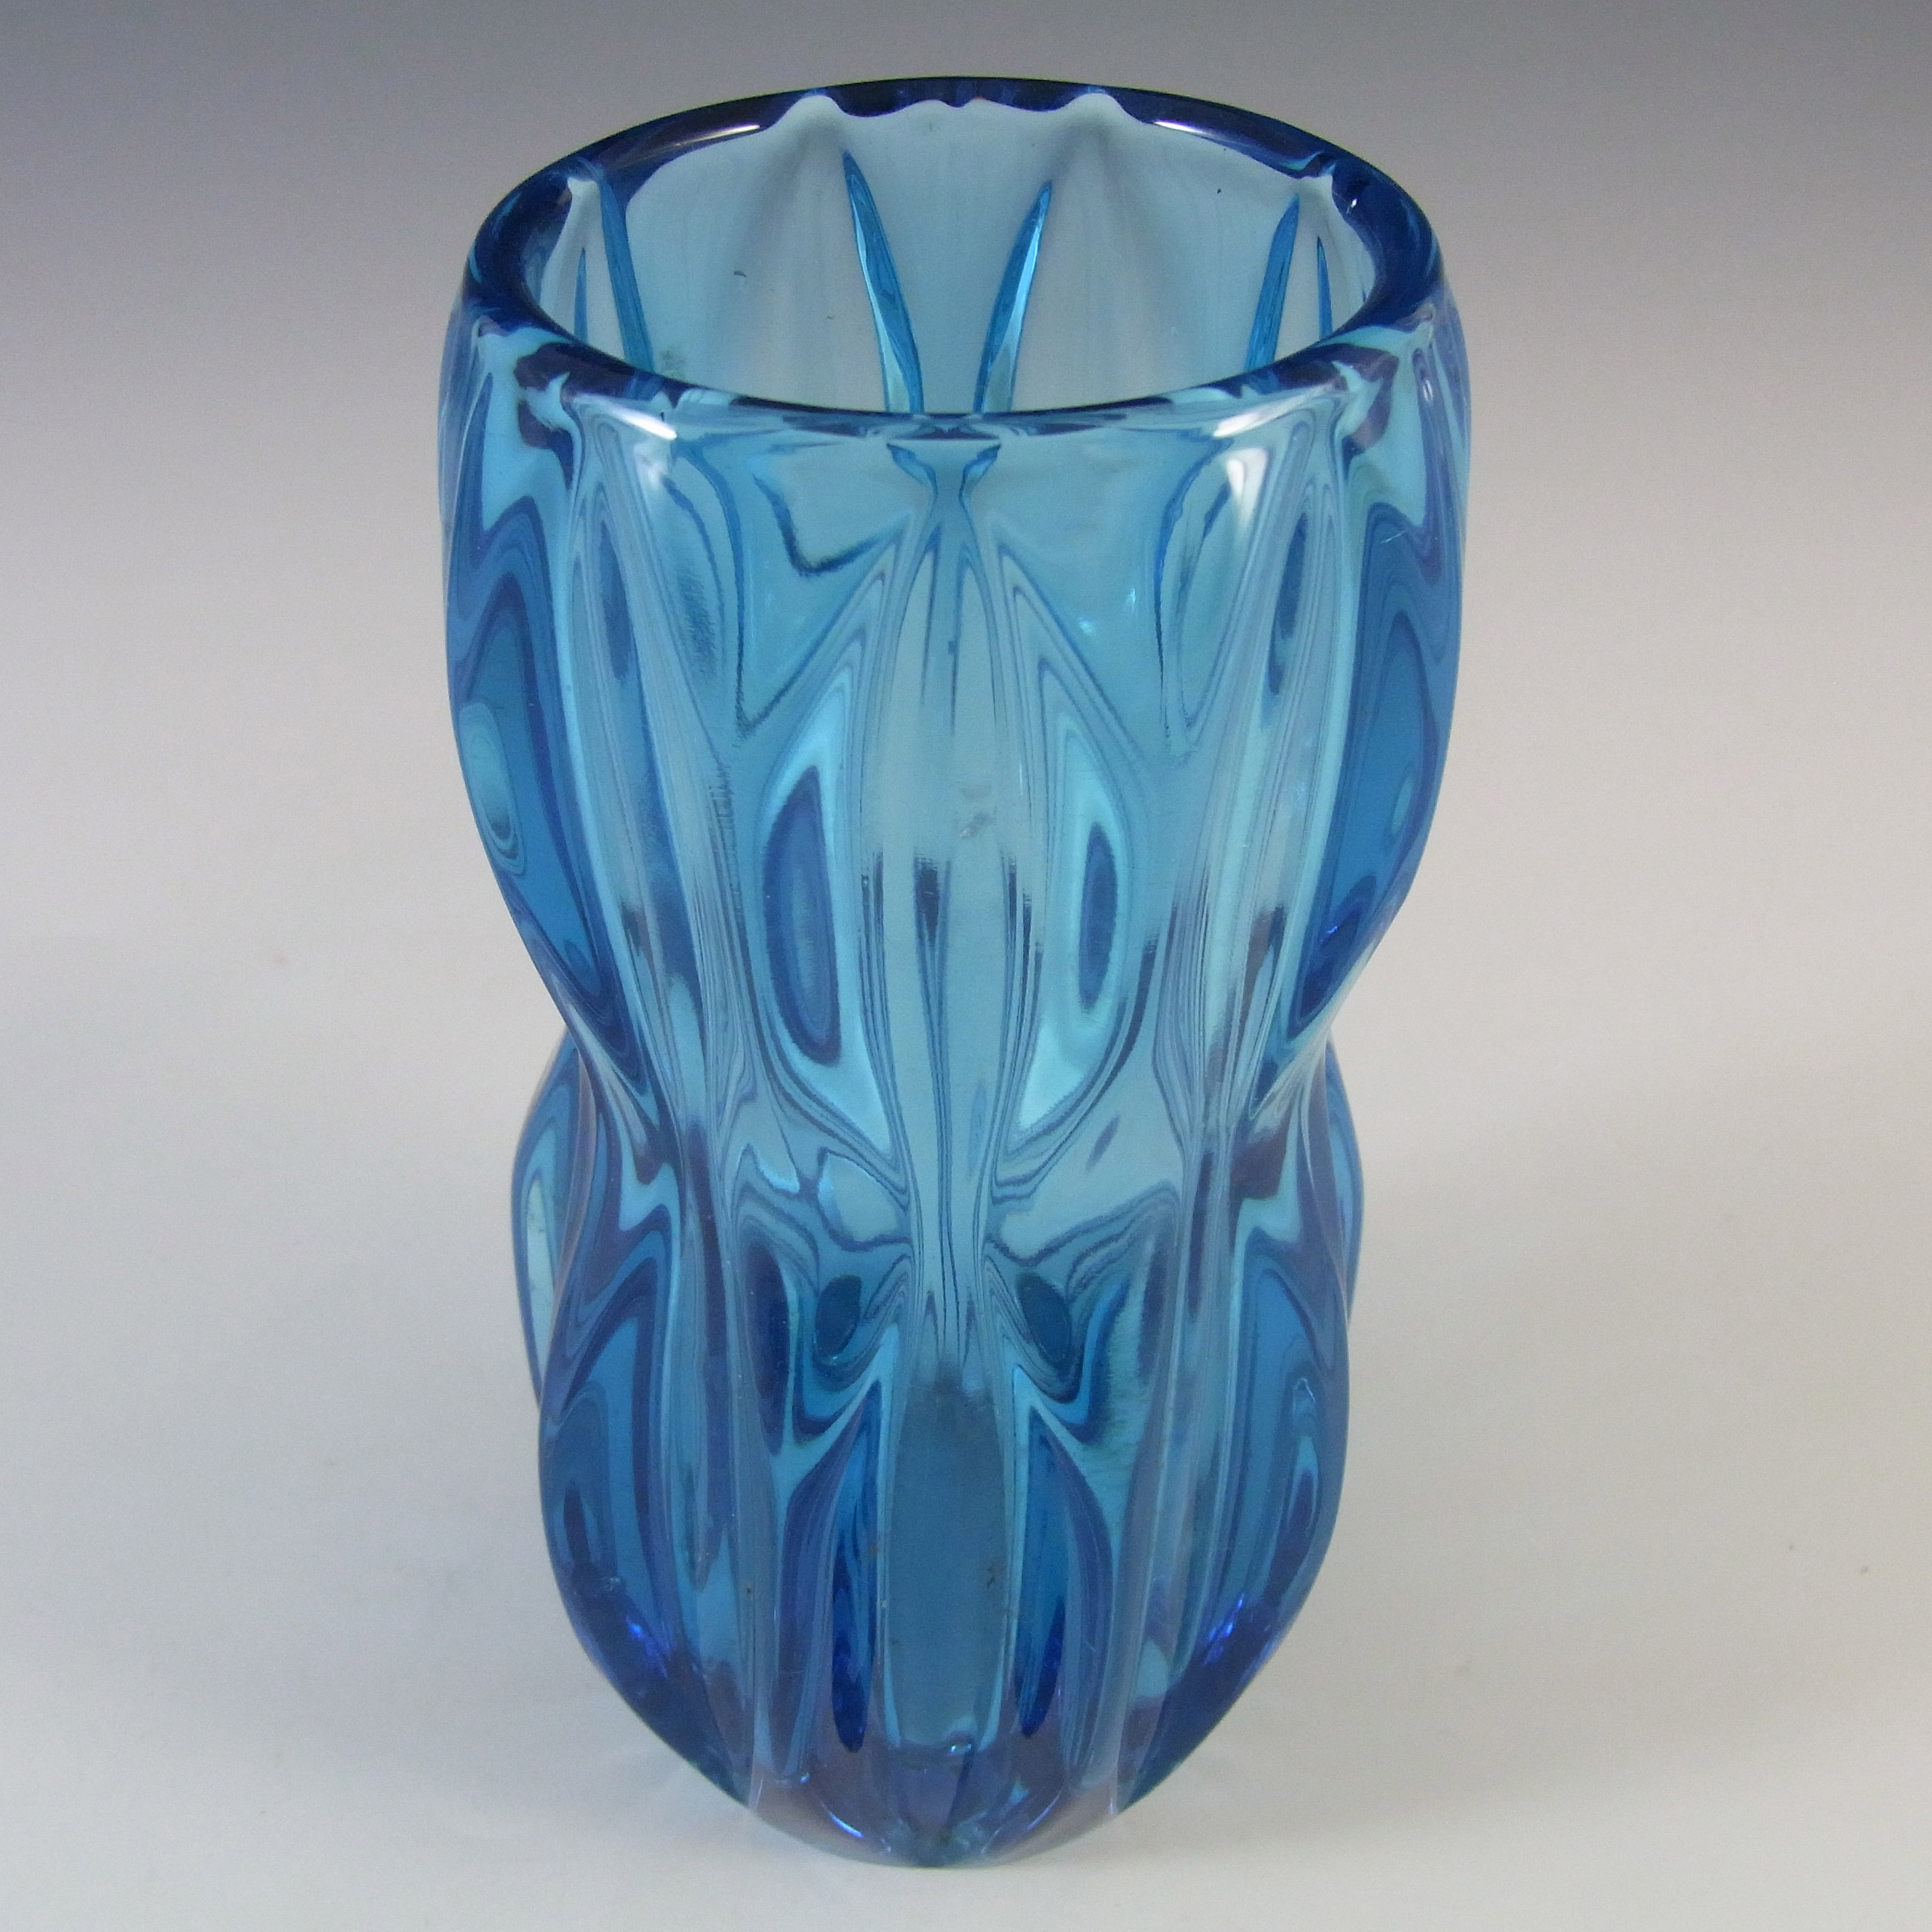 Rosice Sklo Union Blue Glass Vase by Jan Schmid #1032 - Click Image to Close